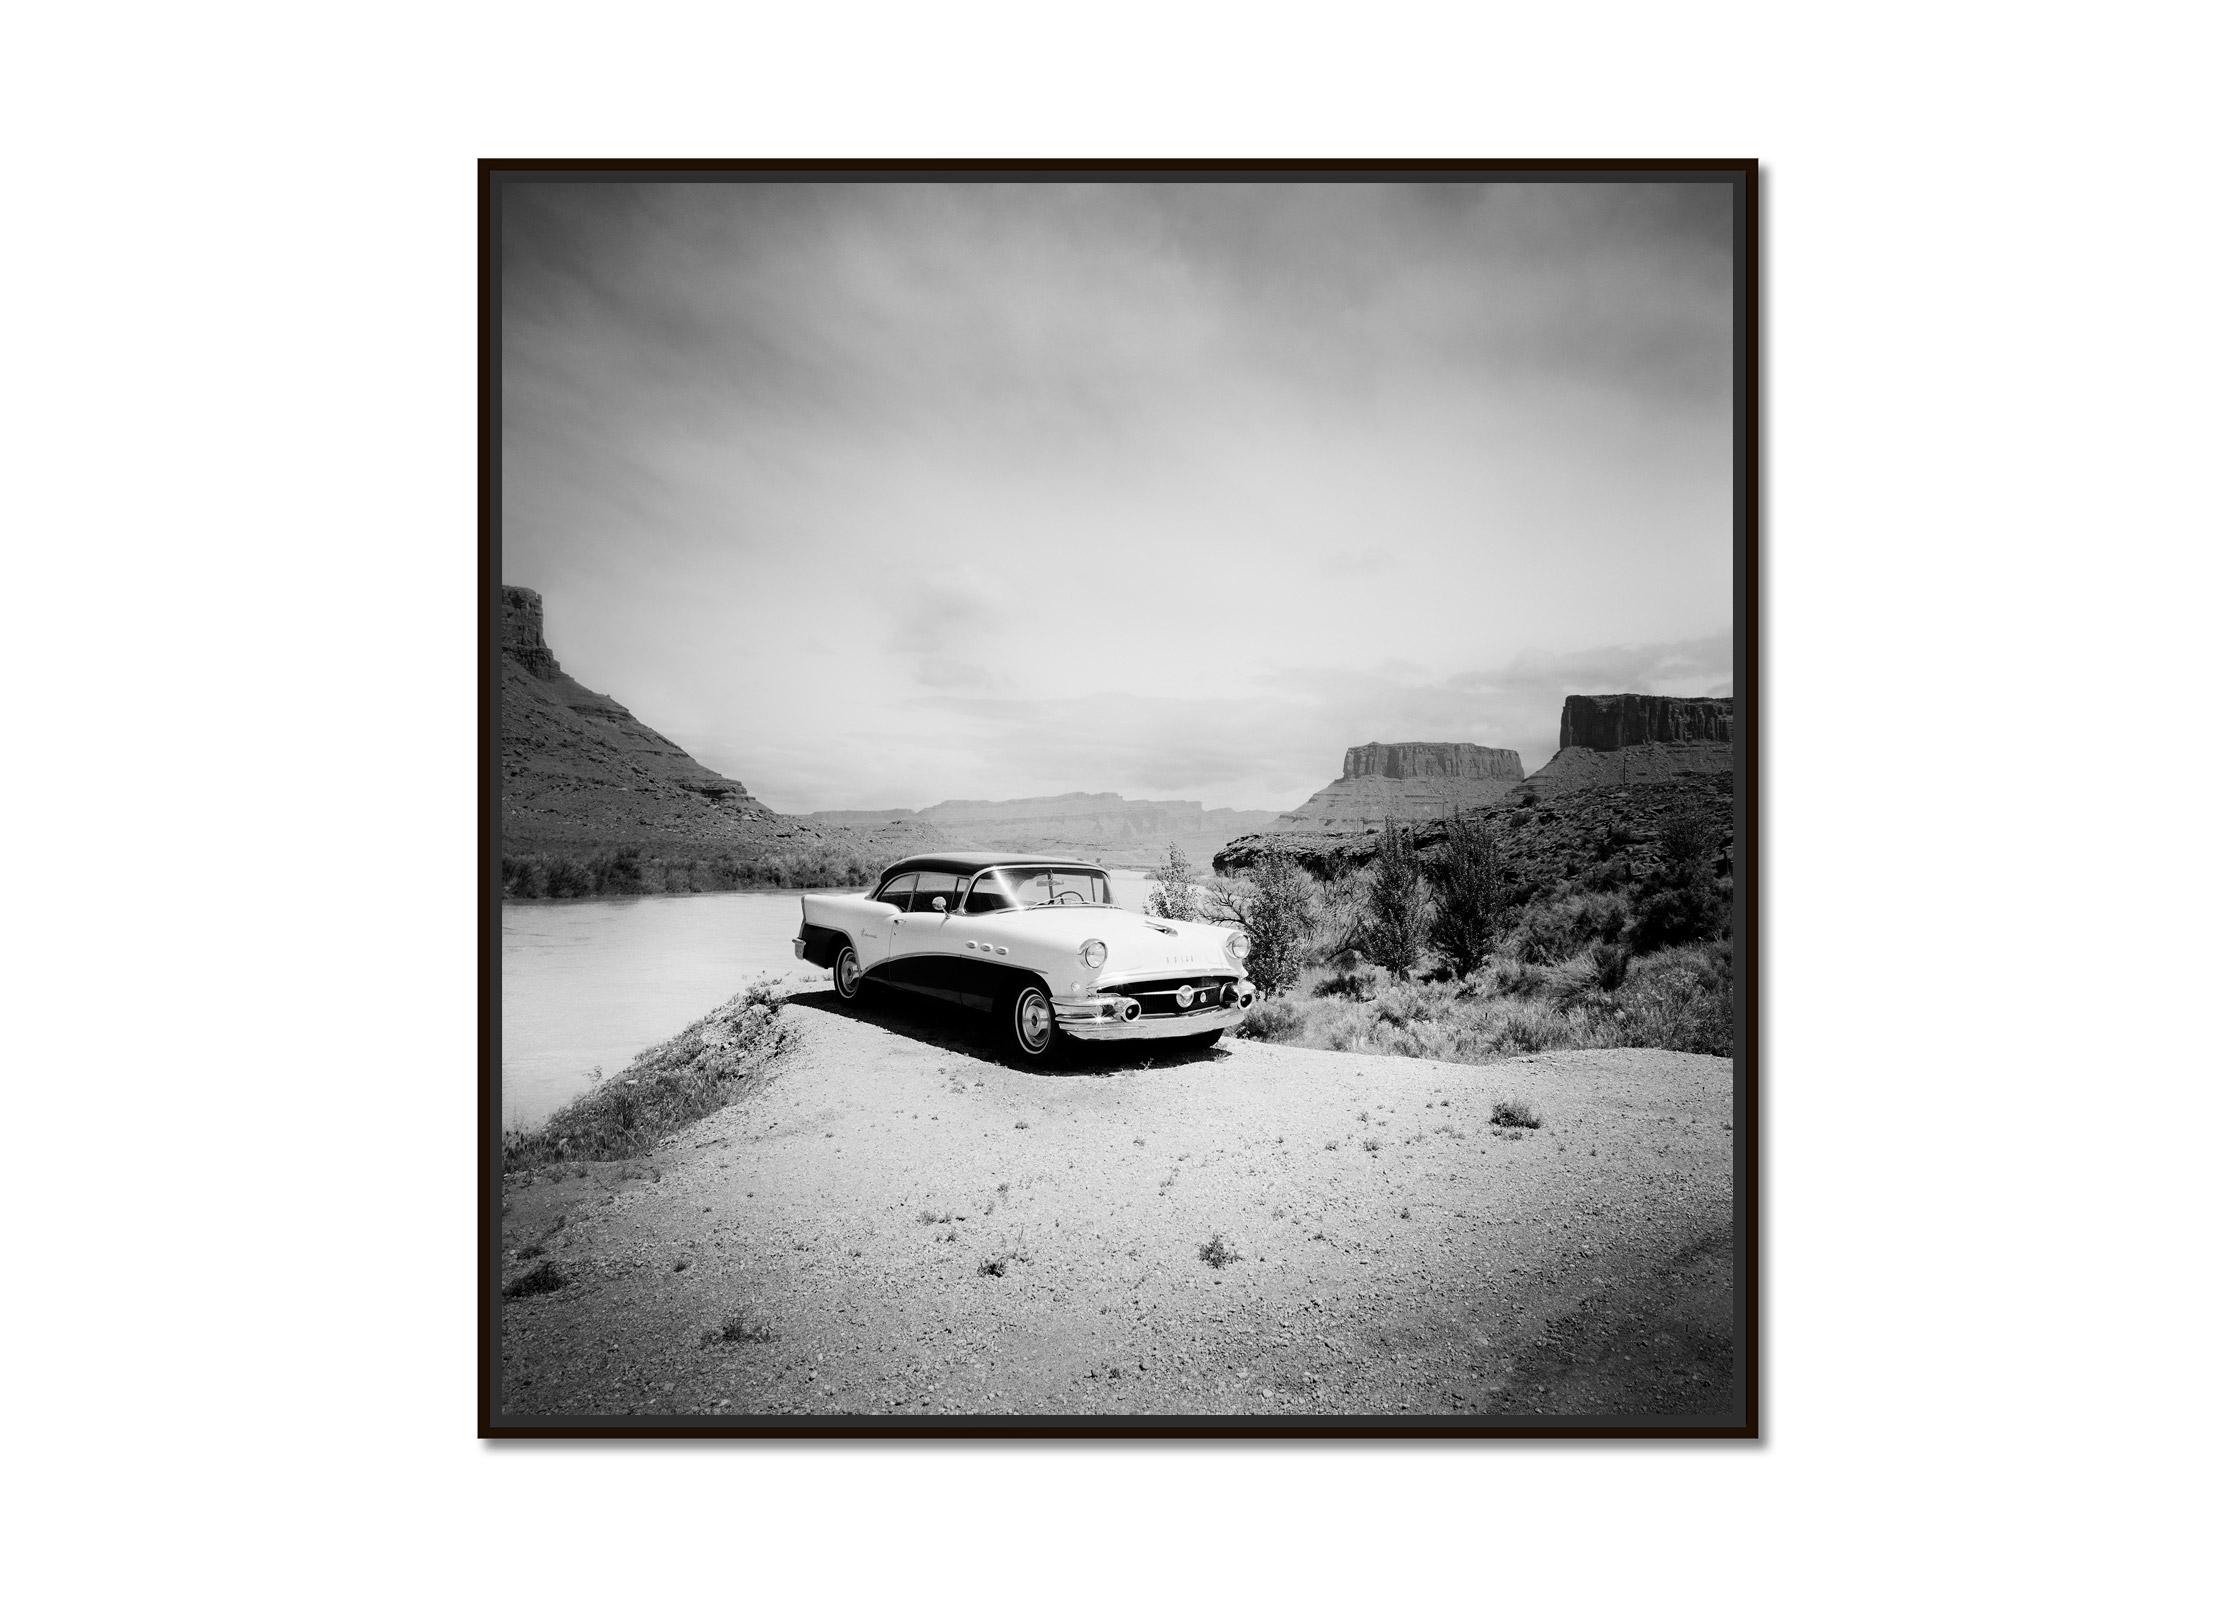 Buick 60 Century Convertible, Desert, USA, black and white landscape photography - Photograph by Gerald Berghammer